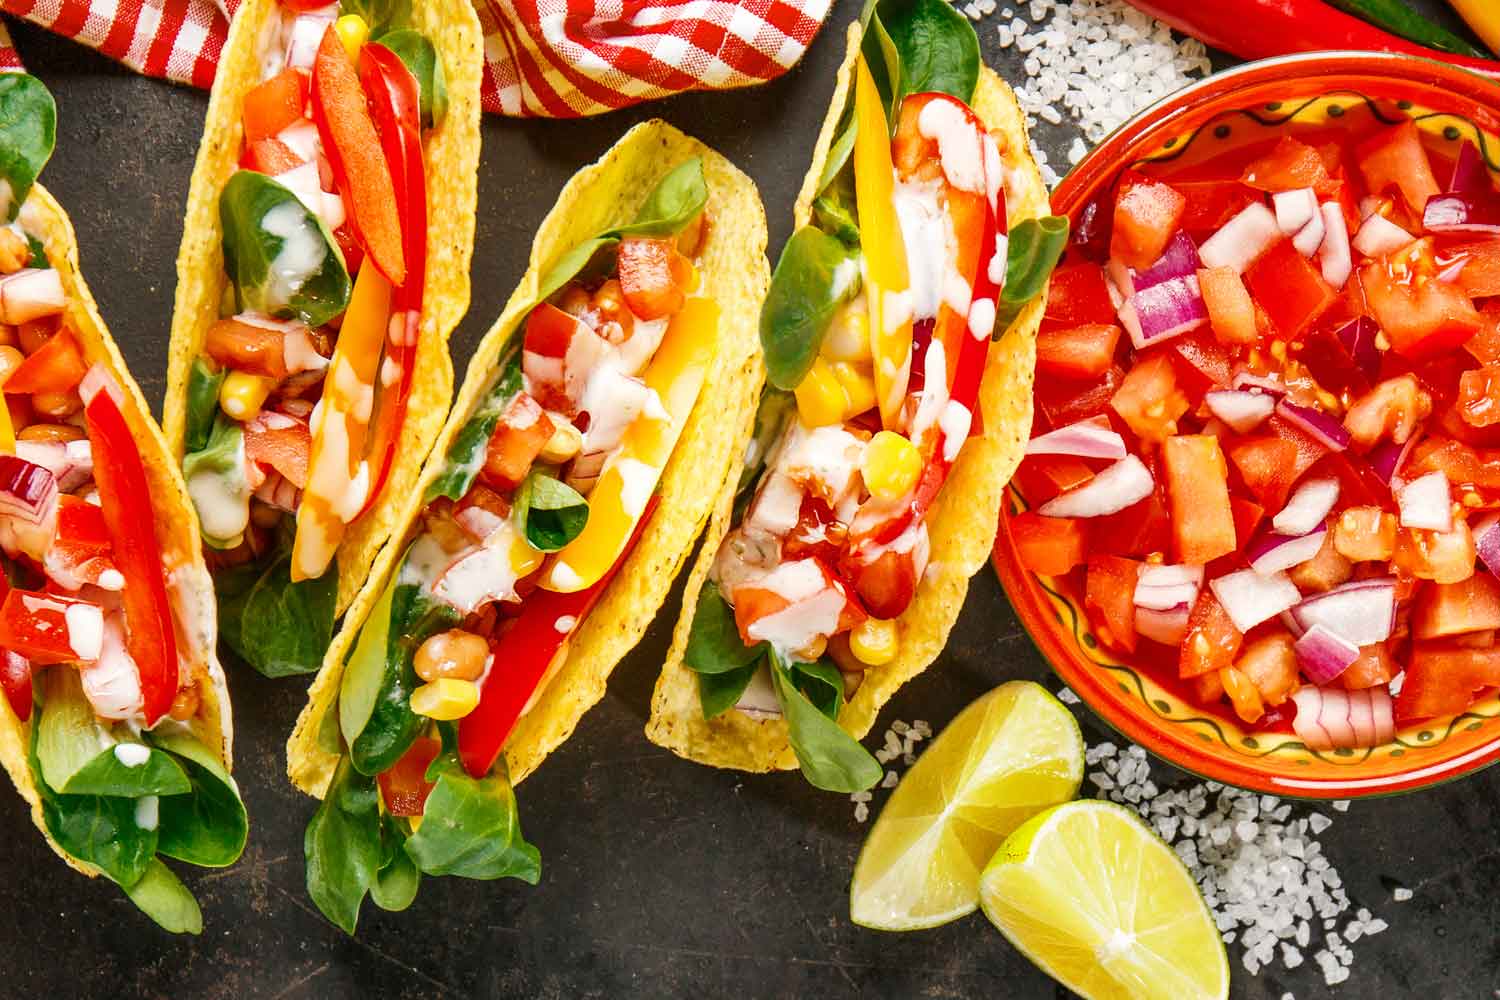 Snack-a-Tacos with Pico de Gallo Salsa - Wholesome Kids Catering